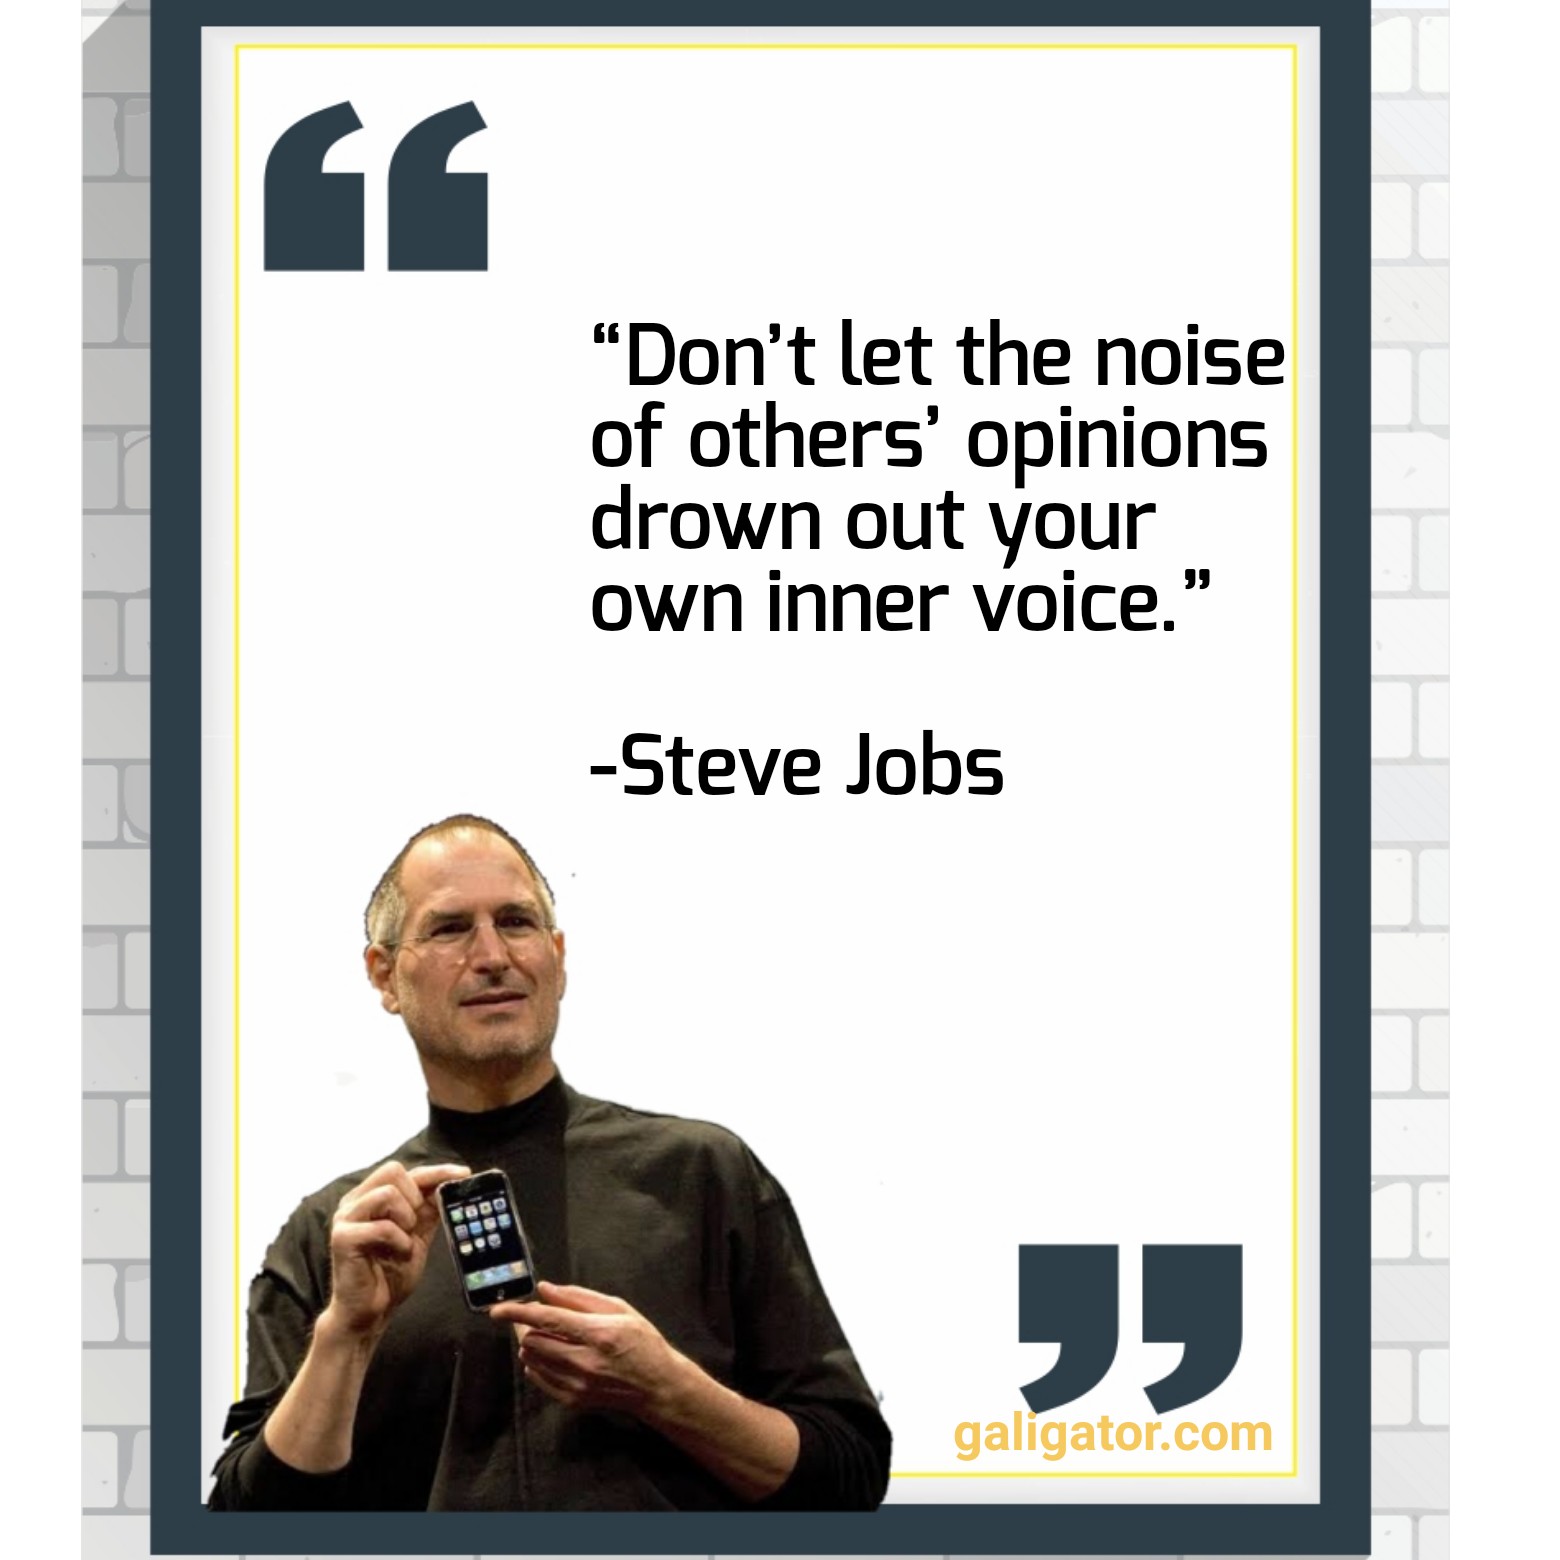 iphone quotes , self motivation motivation iphone wallpaper quotes , iphone wallpaper quotes,marketing quotes steve jobs,steve jobs quotes in english ,leadership steve jobs quotes ,steve jobs quote overnight success,teamwork steve jobs quotes on leadership ,steve jobs dogma quote ,steve jobs innovation quote,steve jobs death quote,steve jobs simplicity quote,steve jobs quotes your time is limited ,20 most inspirational quotes by steve jobs ,steve jobs quote great things in business ,famous leadership quotes steve jobs 